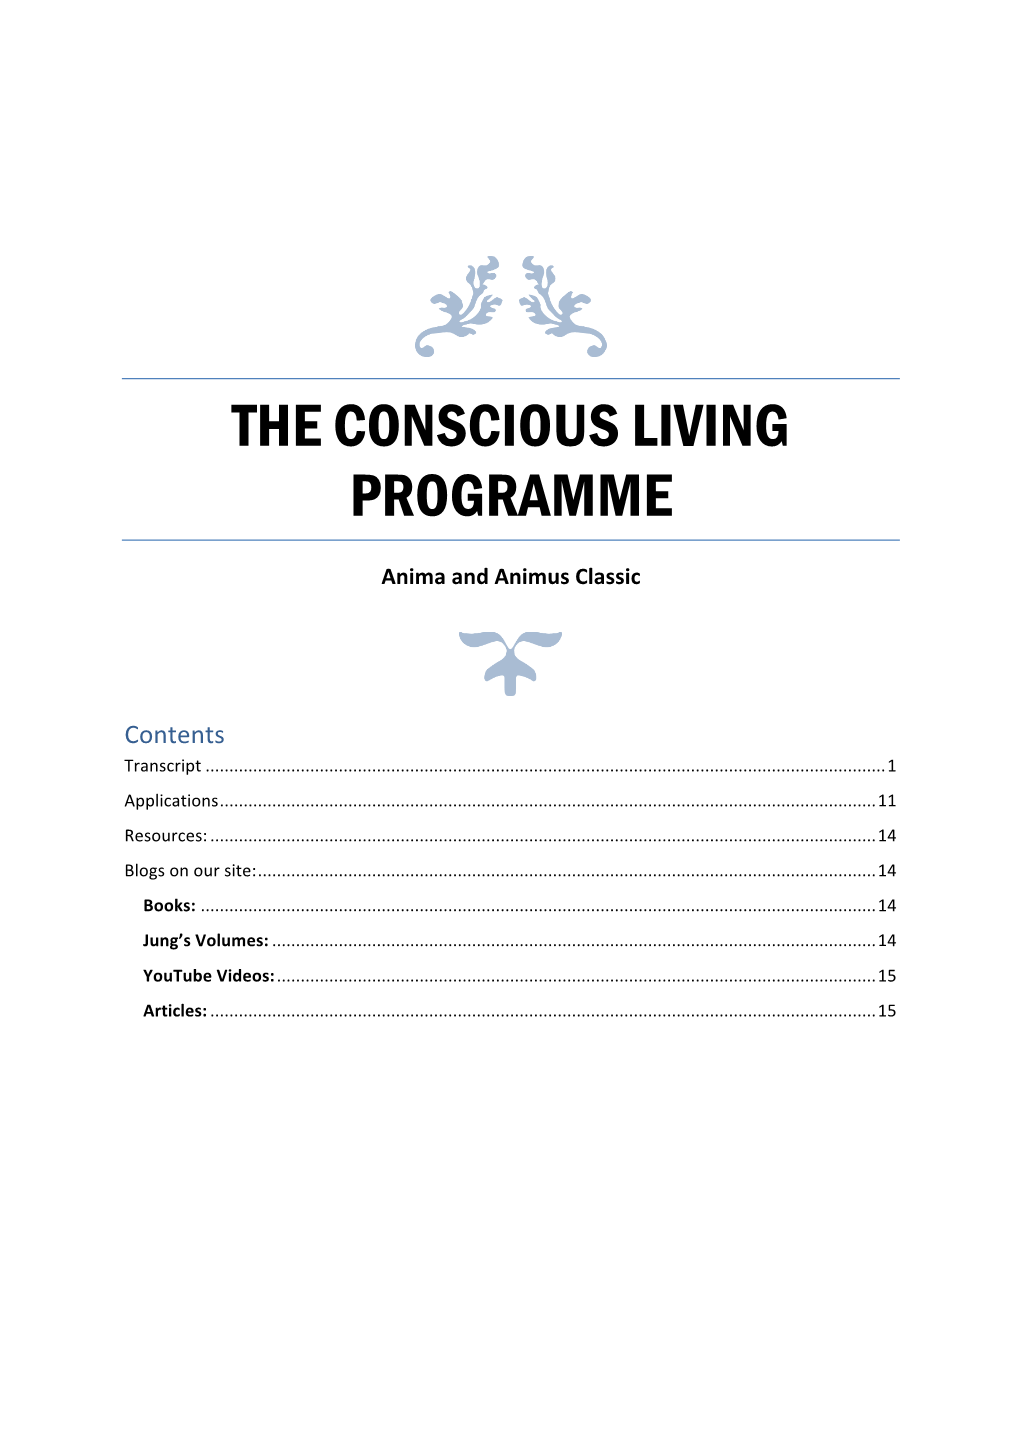 The Conscious Living Programme